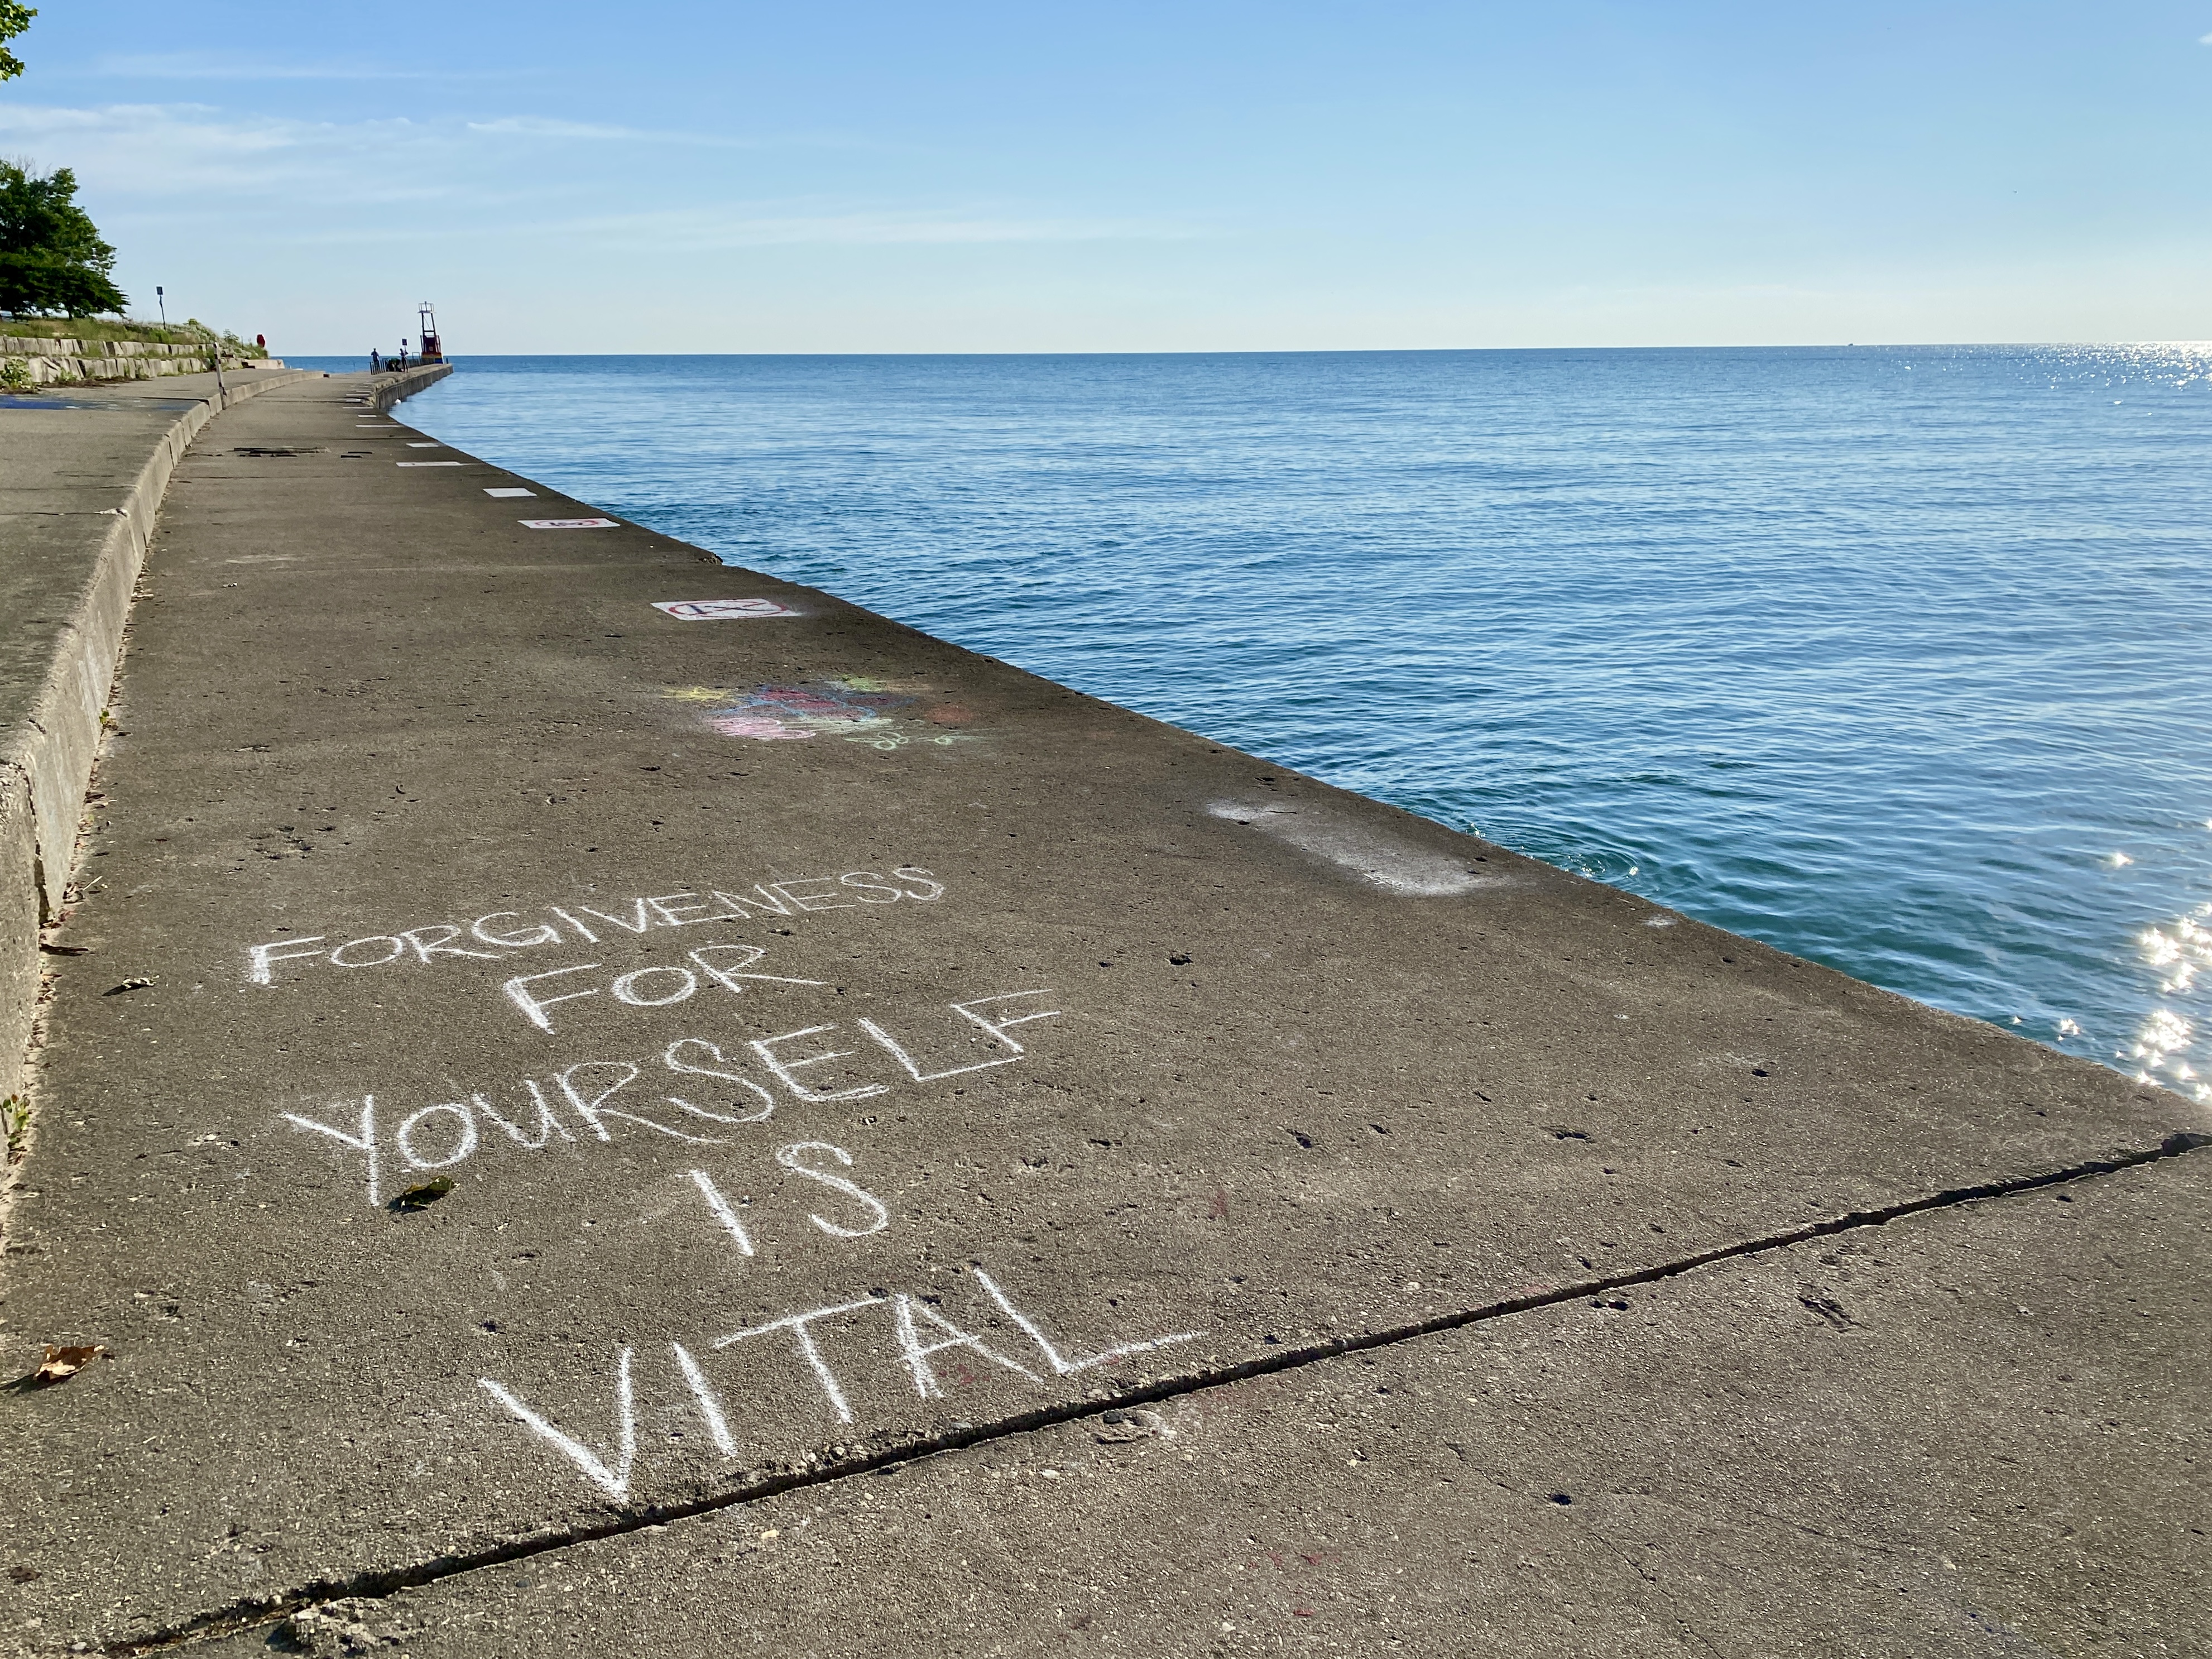 Lakeshore, lined with concrete, curving to the left, to right bright blue lake surface below a blue sky; written on the concrete in the foreground is FORGIVENESS FOR YOURSELF IS VITAL